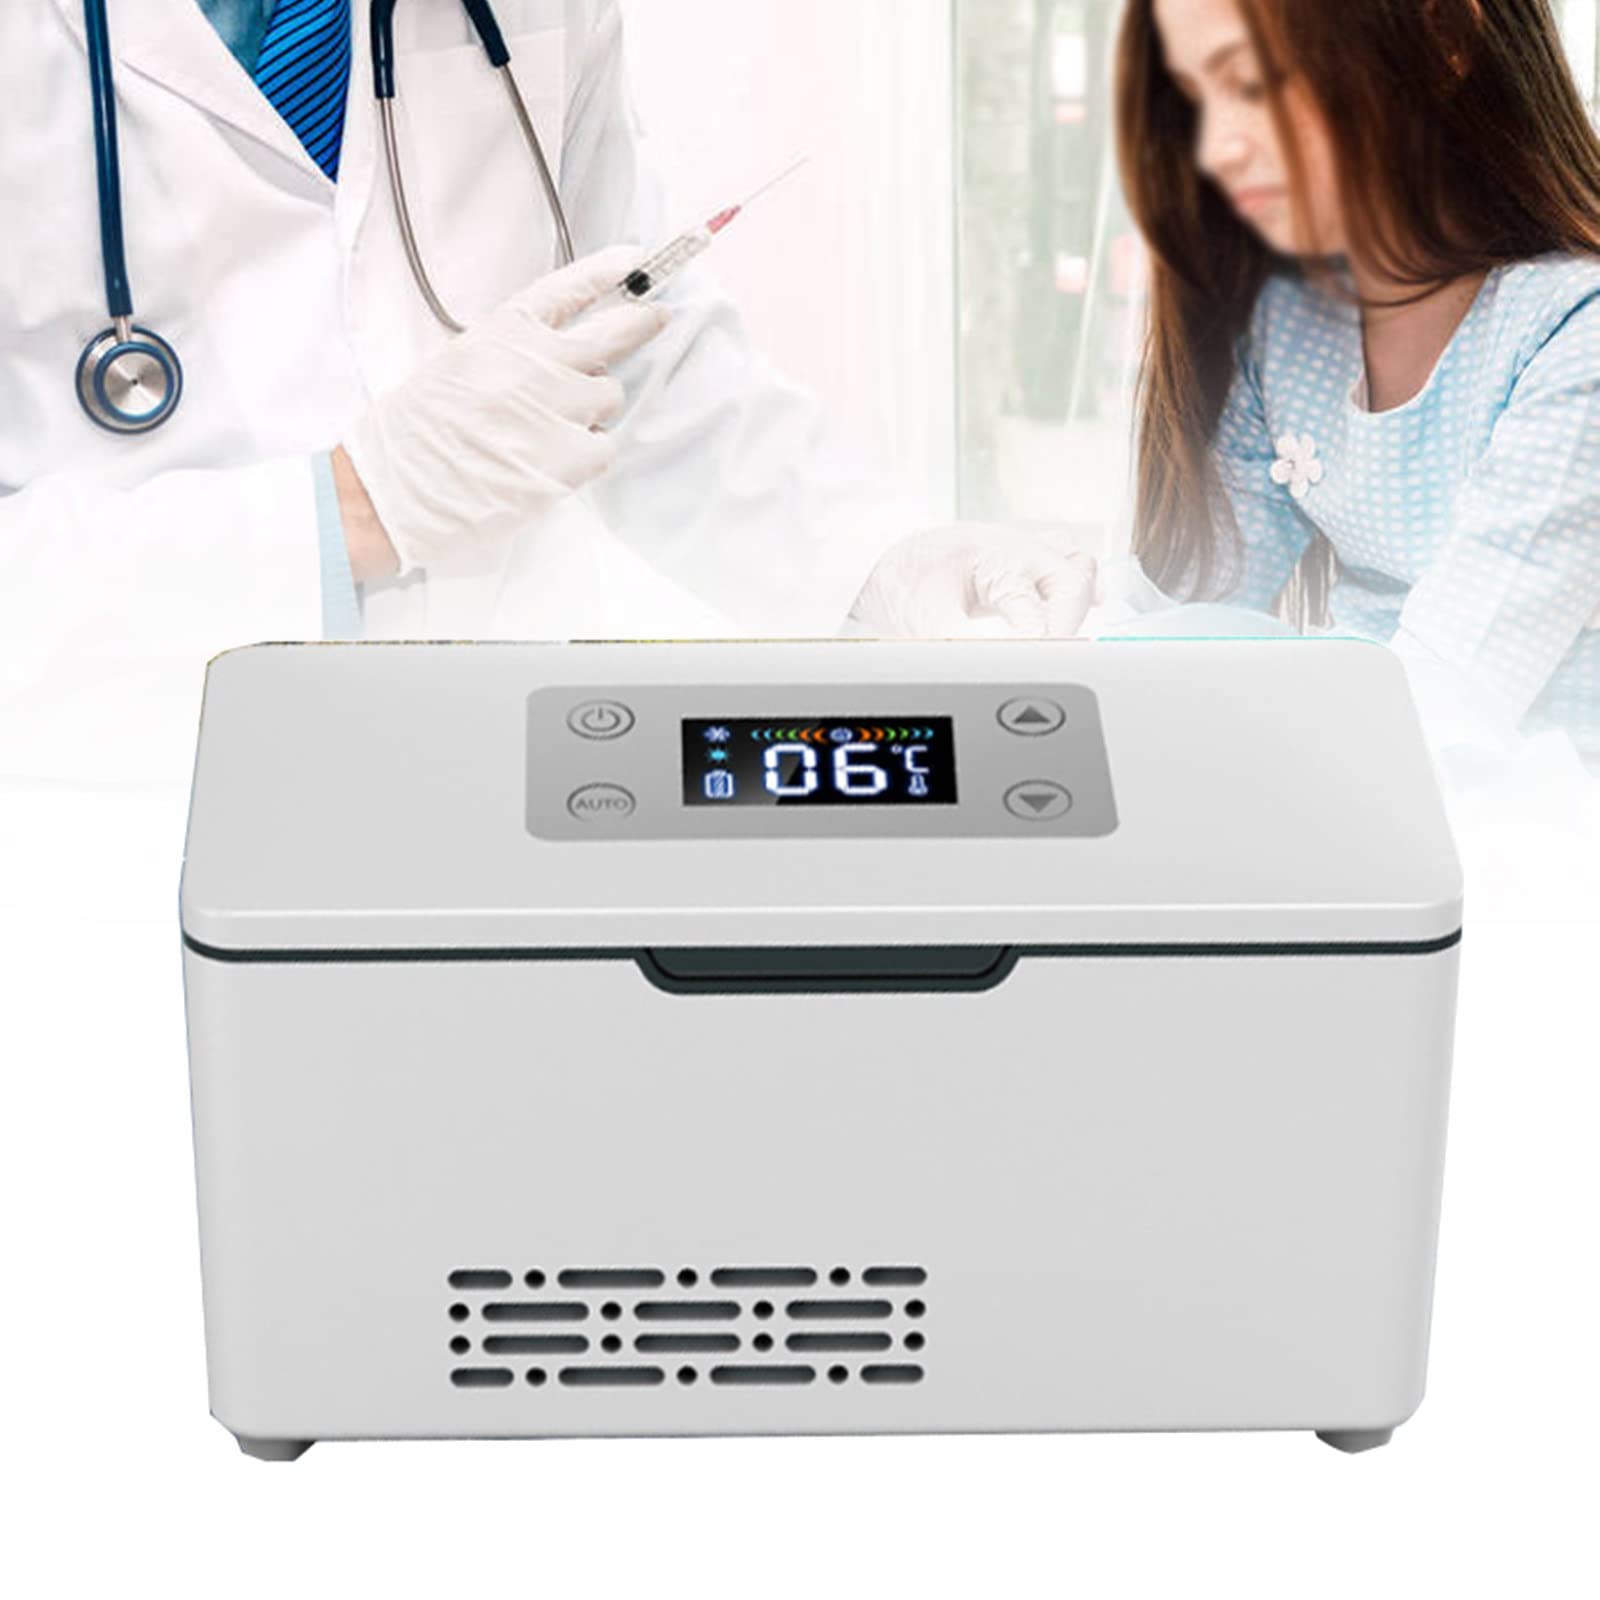 ALSUP Insulin Cool Box Medicine Fridge Electric Cooler Portable Travel Box  Thermostat 2-8 Degrees with Insulin Interferon Growth Hormone Vaccine Eye  Drops for Summer Travel Work/White 1cell